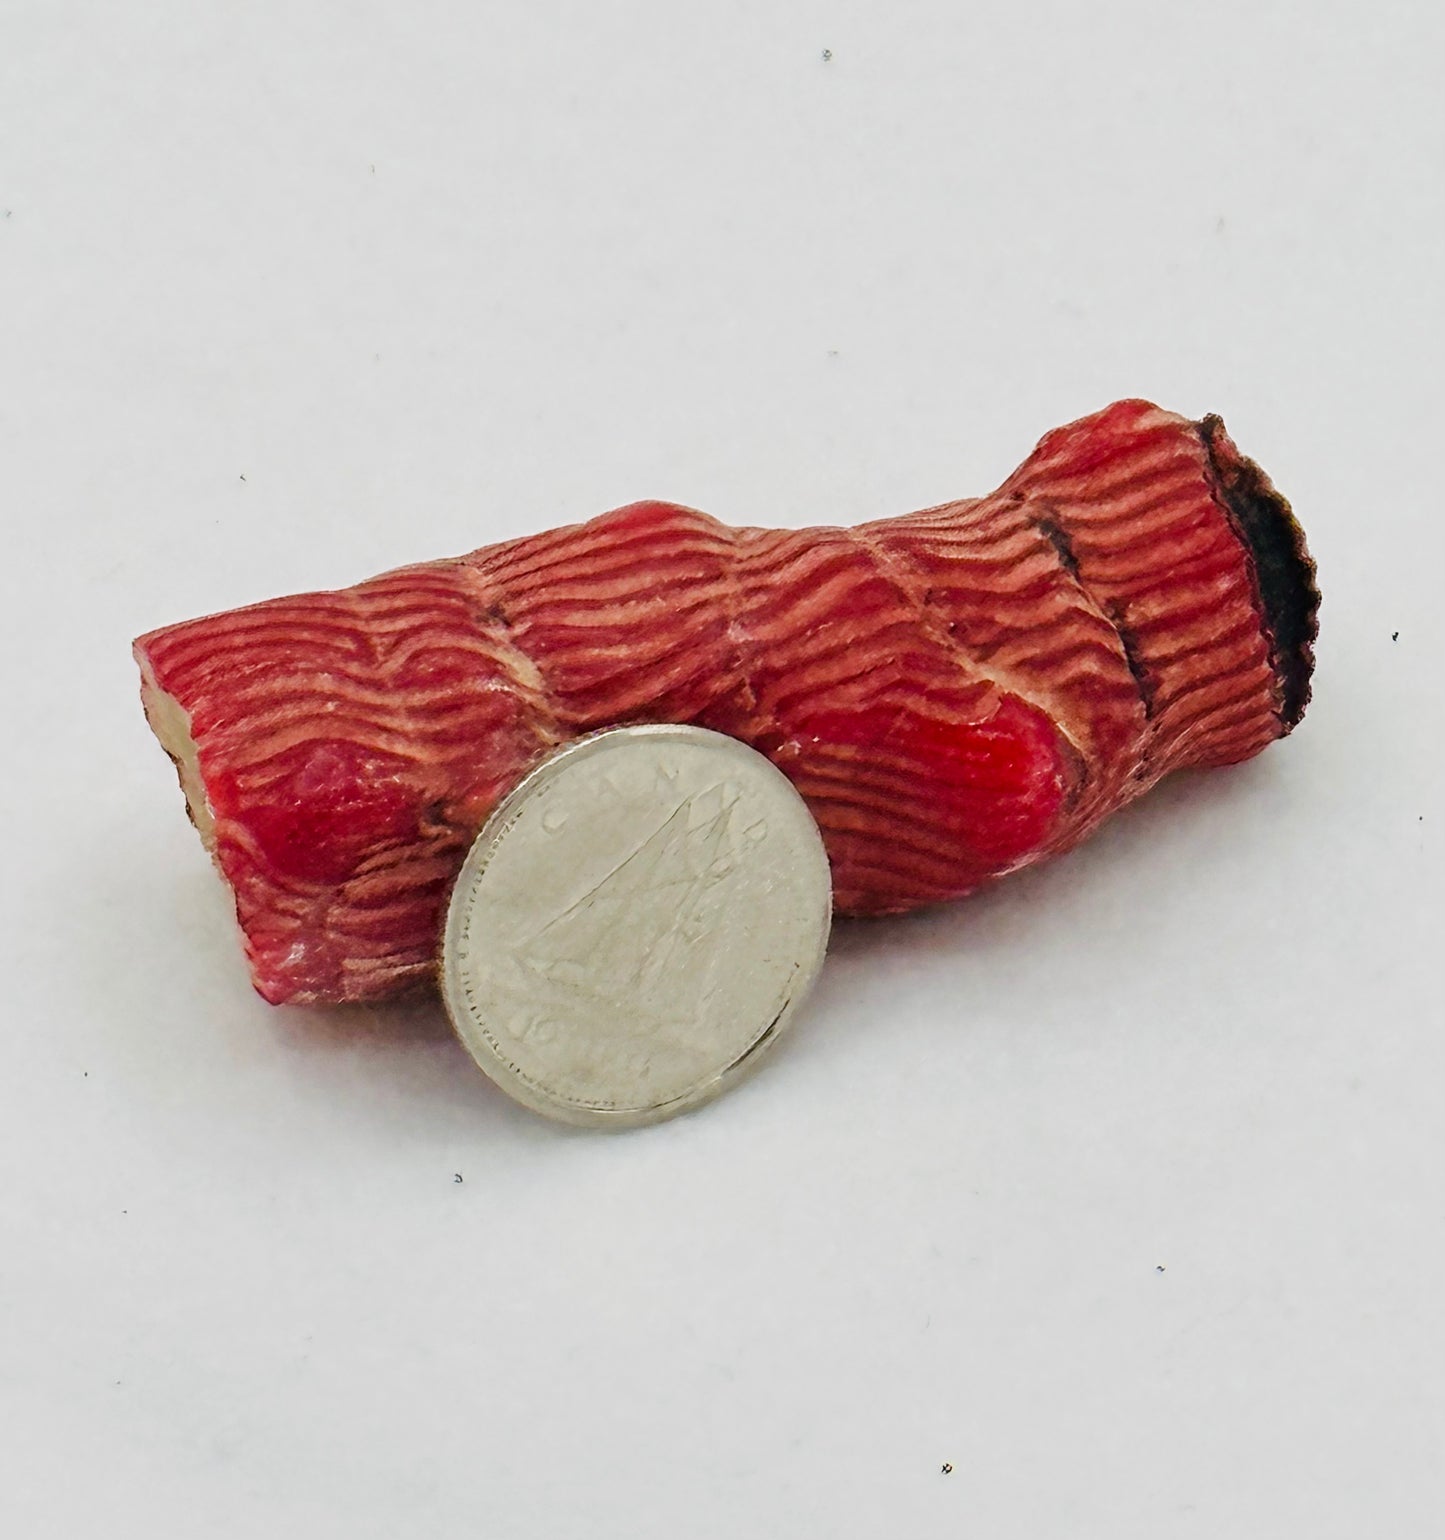 Red Bamboo Coral